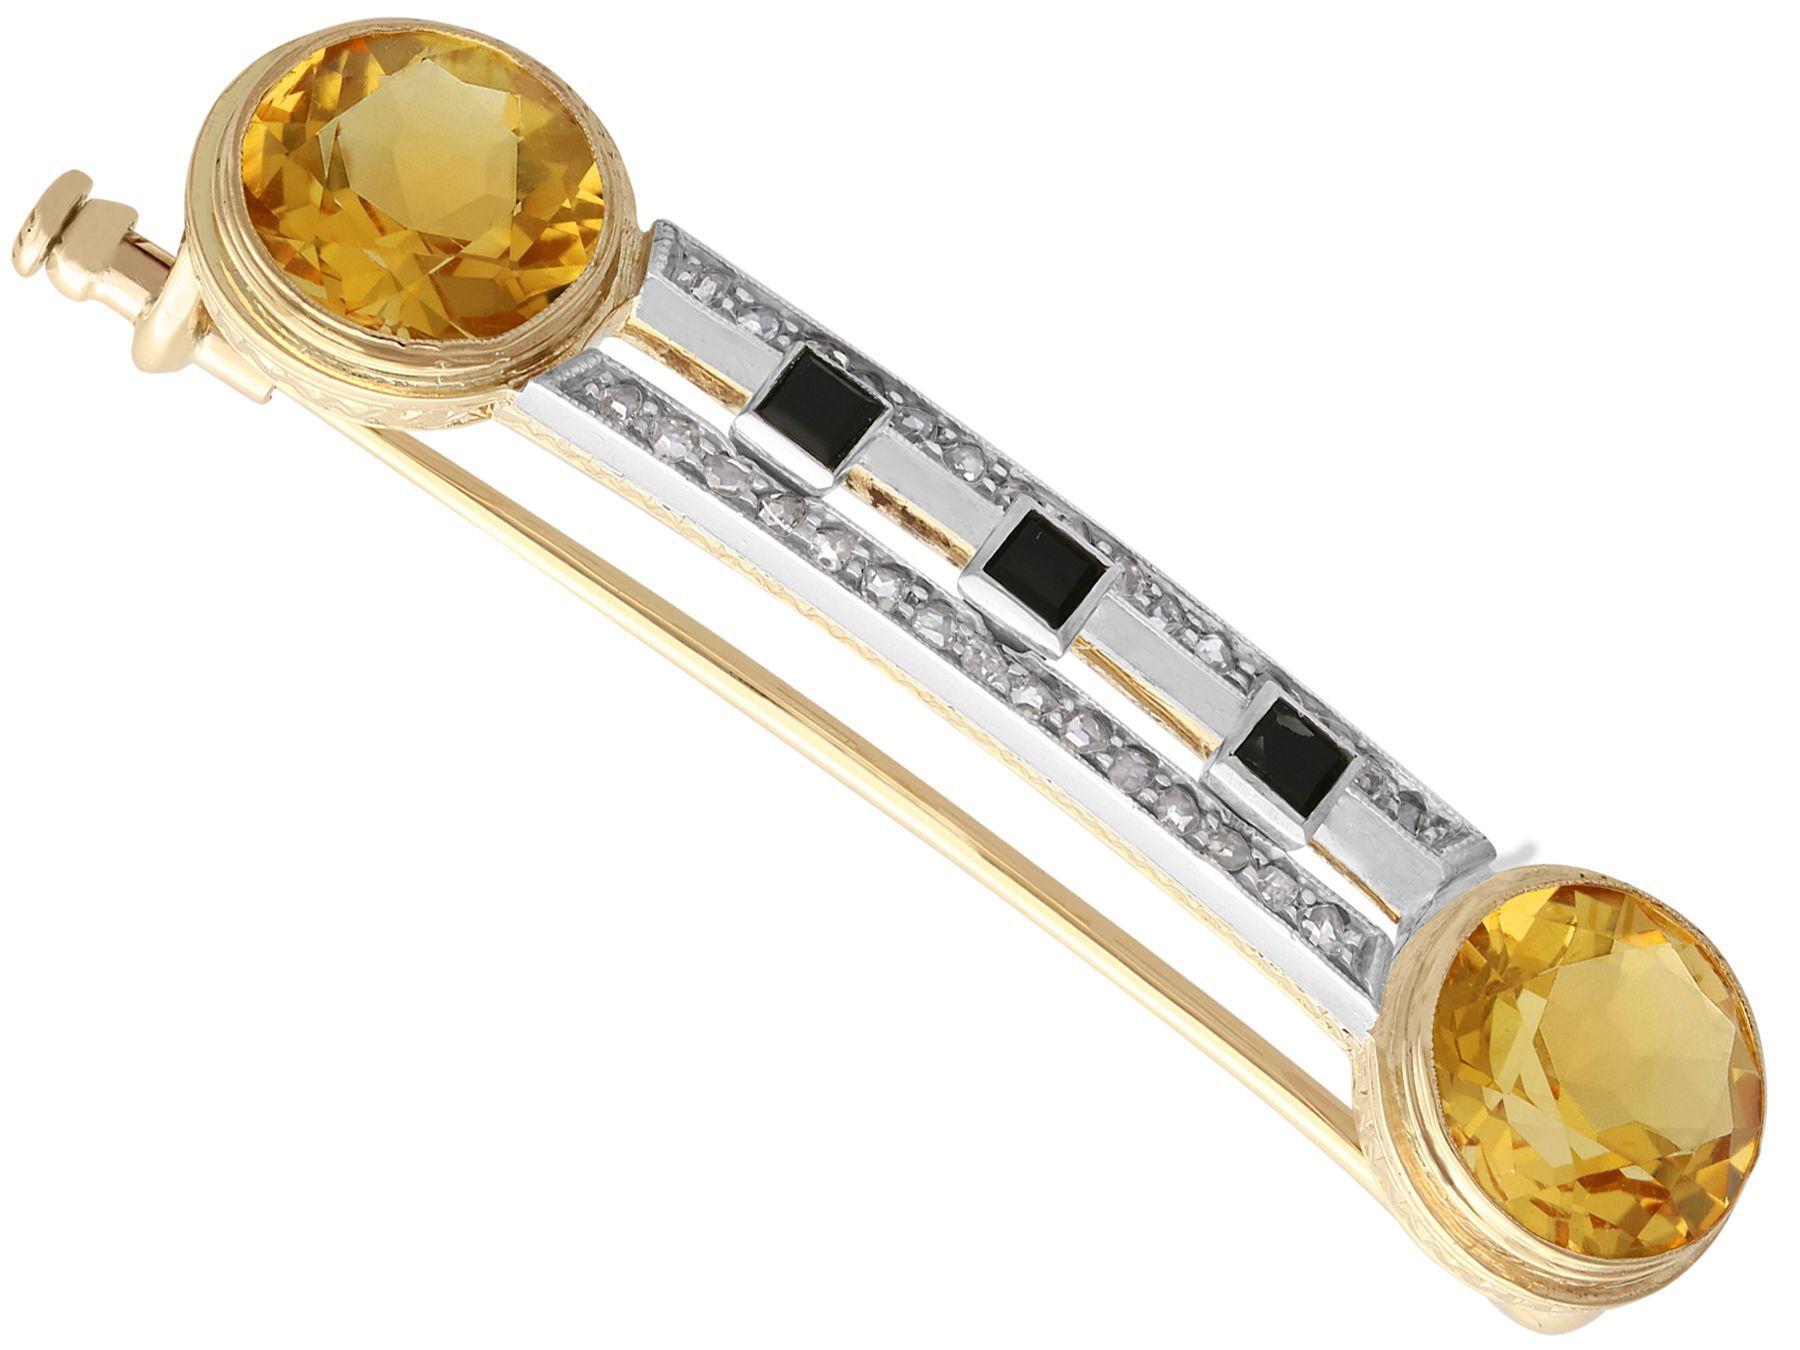  A fine and impressive antique 6.69 carat citrine, 0.28 diamond and onyx, 14 karat yellow gold brooch; part of our antique jewelry/estate jewelry collections.

This fine and impressive antique brooch has been crafted in 14k yellow gold with a silver